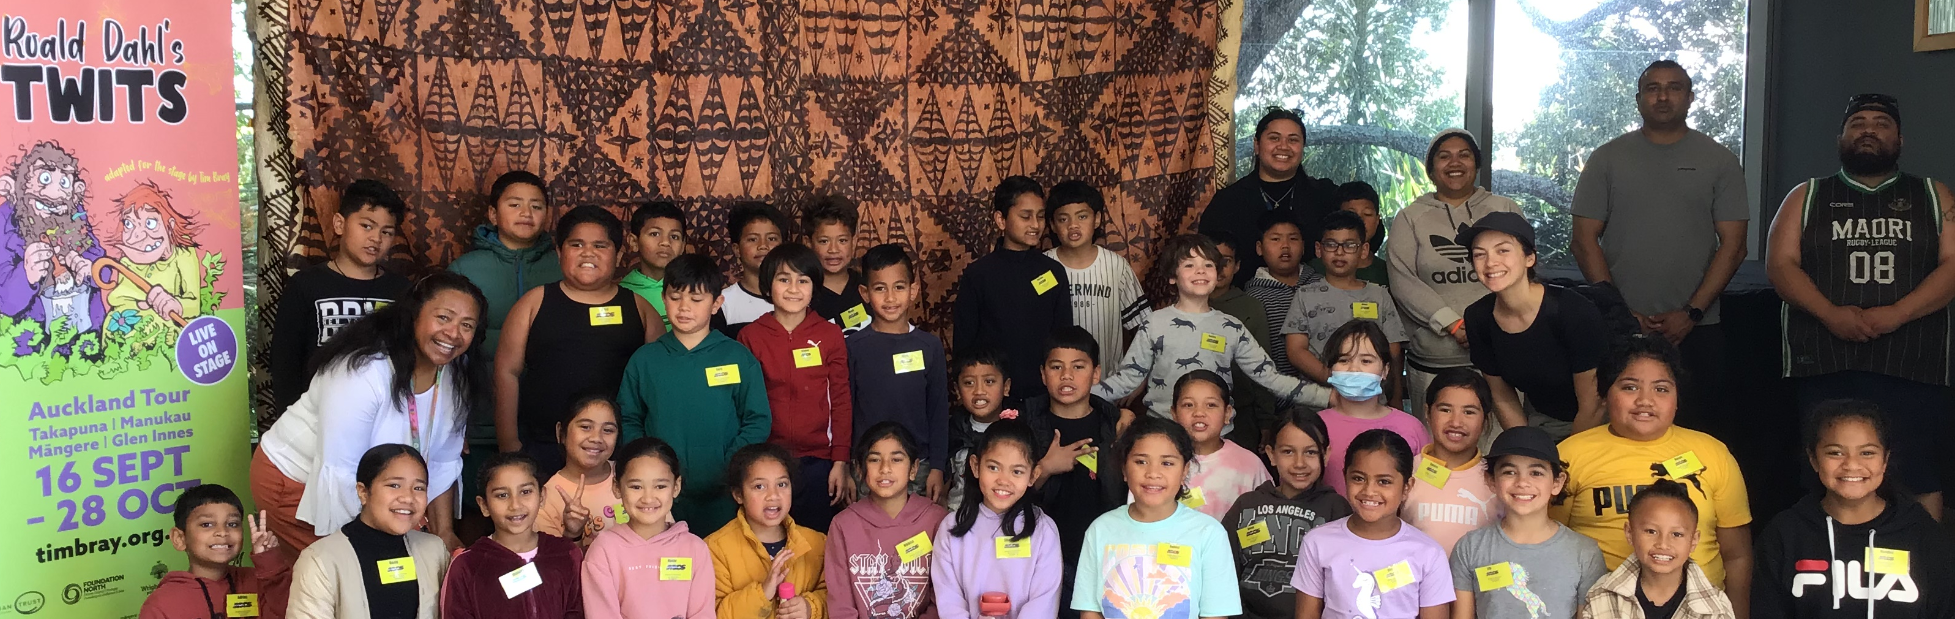 Mangere Central School students photographed in front of a show banner.